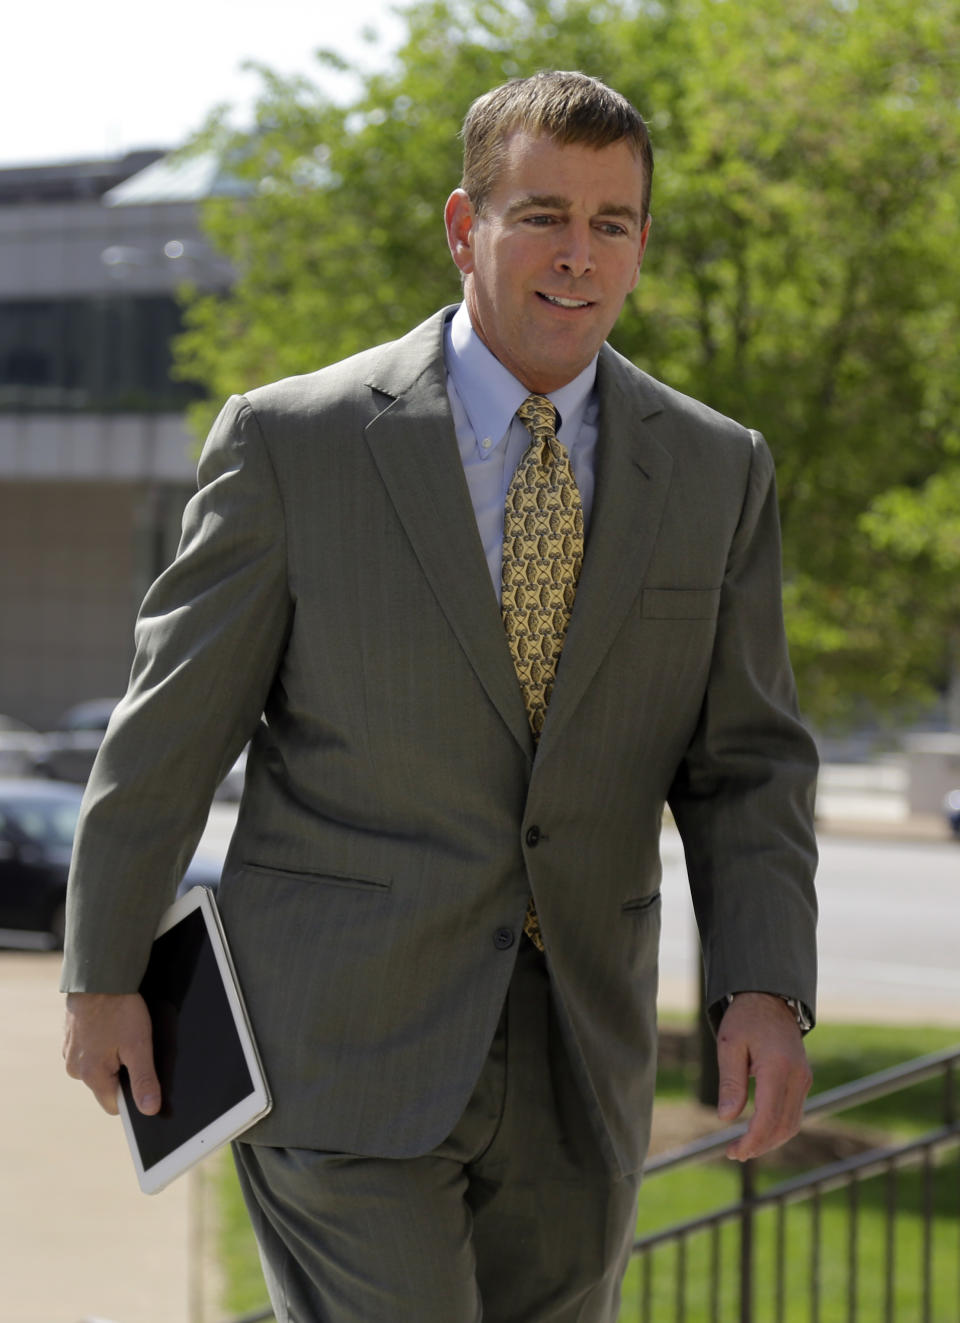 Former Anheuser-Busch CEO August Busch IV enters the Civil Court building before testifying in a gender discrimination lawsuit Tuesday, May 6, 2014, in St. Louis. Francine Katz, former vice president of communications and consumer affairs for the maker of Budweiser, Bud Light and other beers, is suing Anheuser-Busch for gender discrimination. (AP Photo/Jeff Roberson)